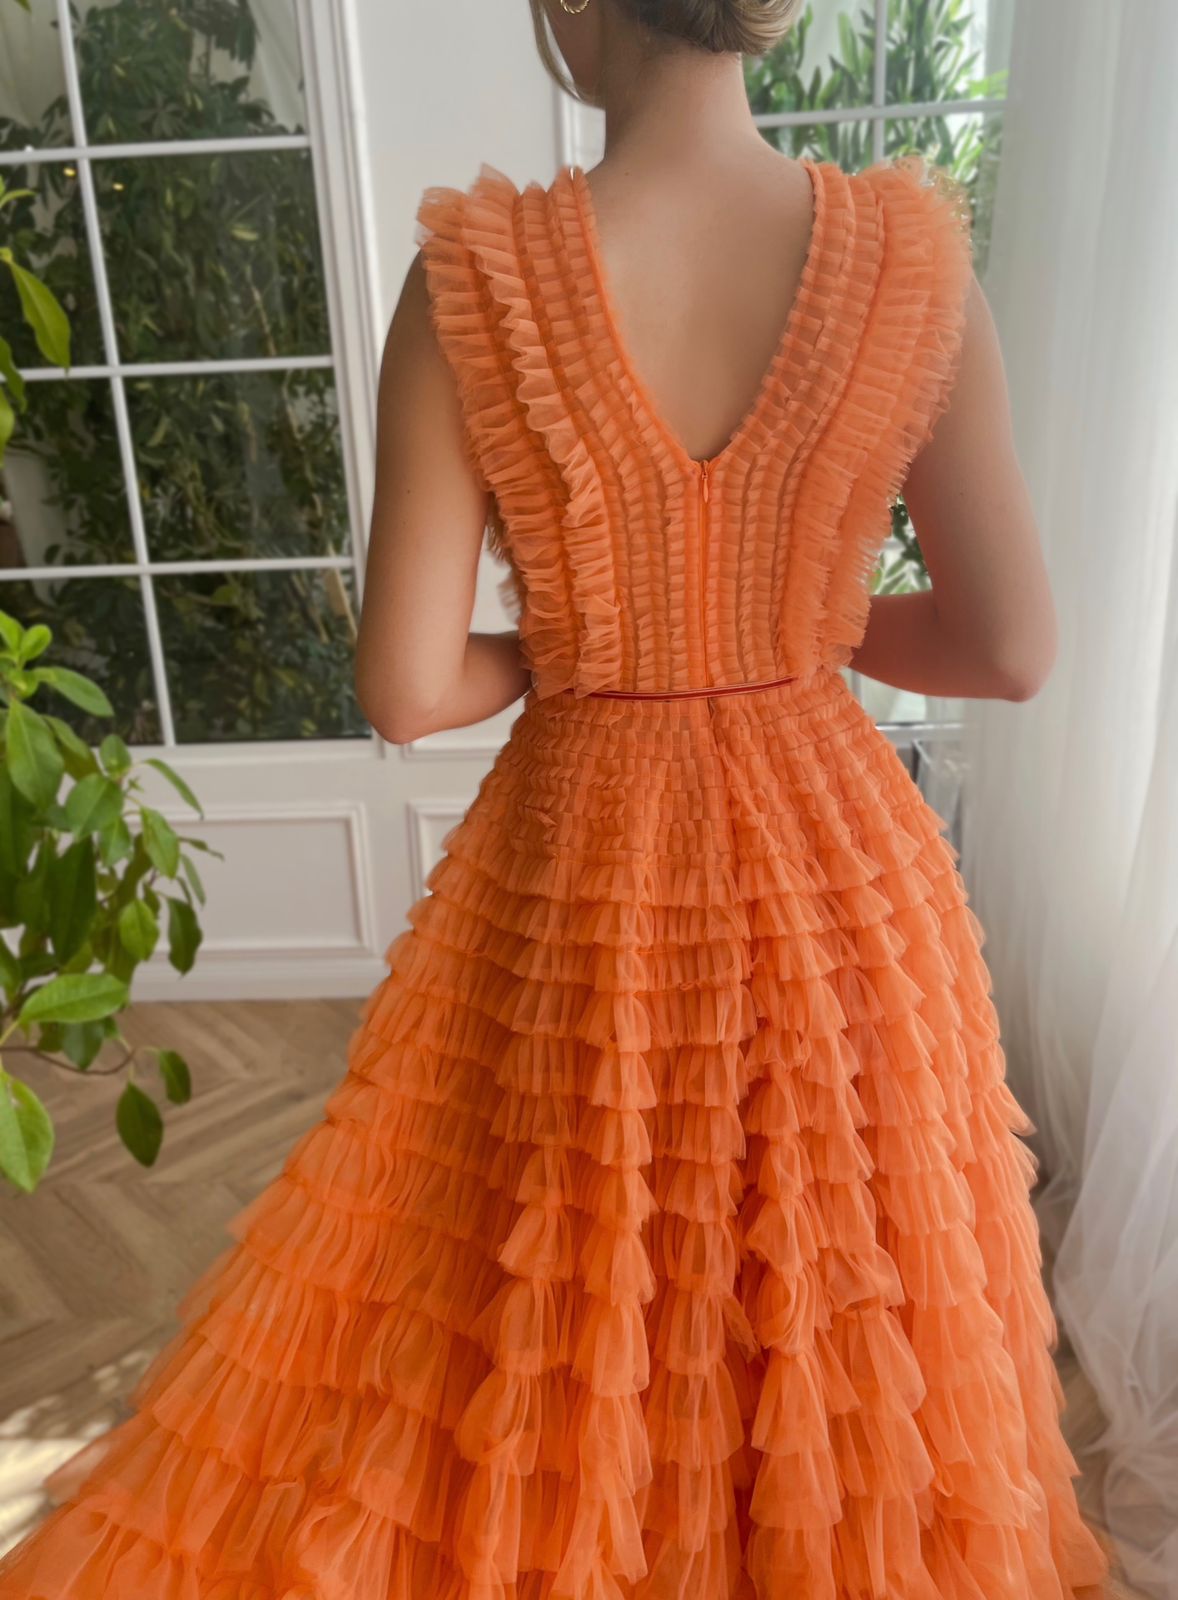 Orange A-Line dress with ruffles, no sleeves and v-neck